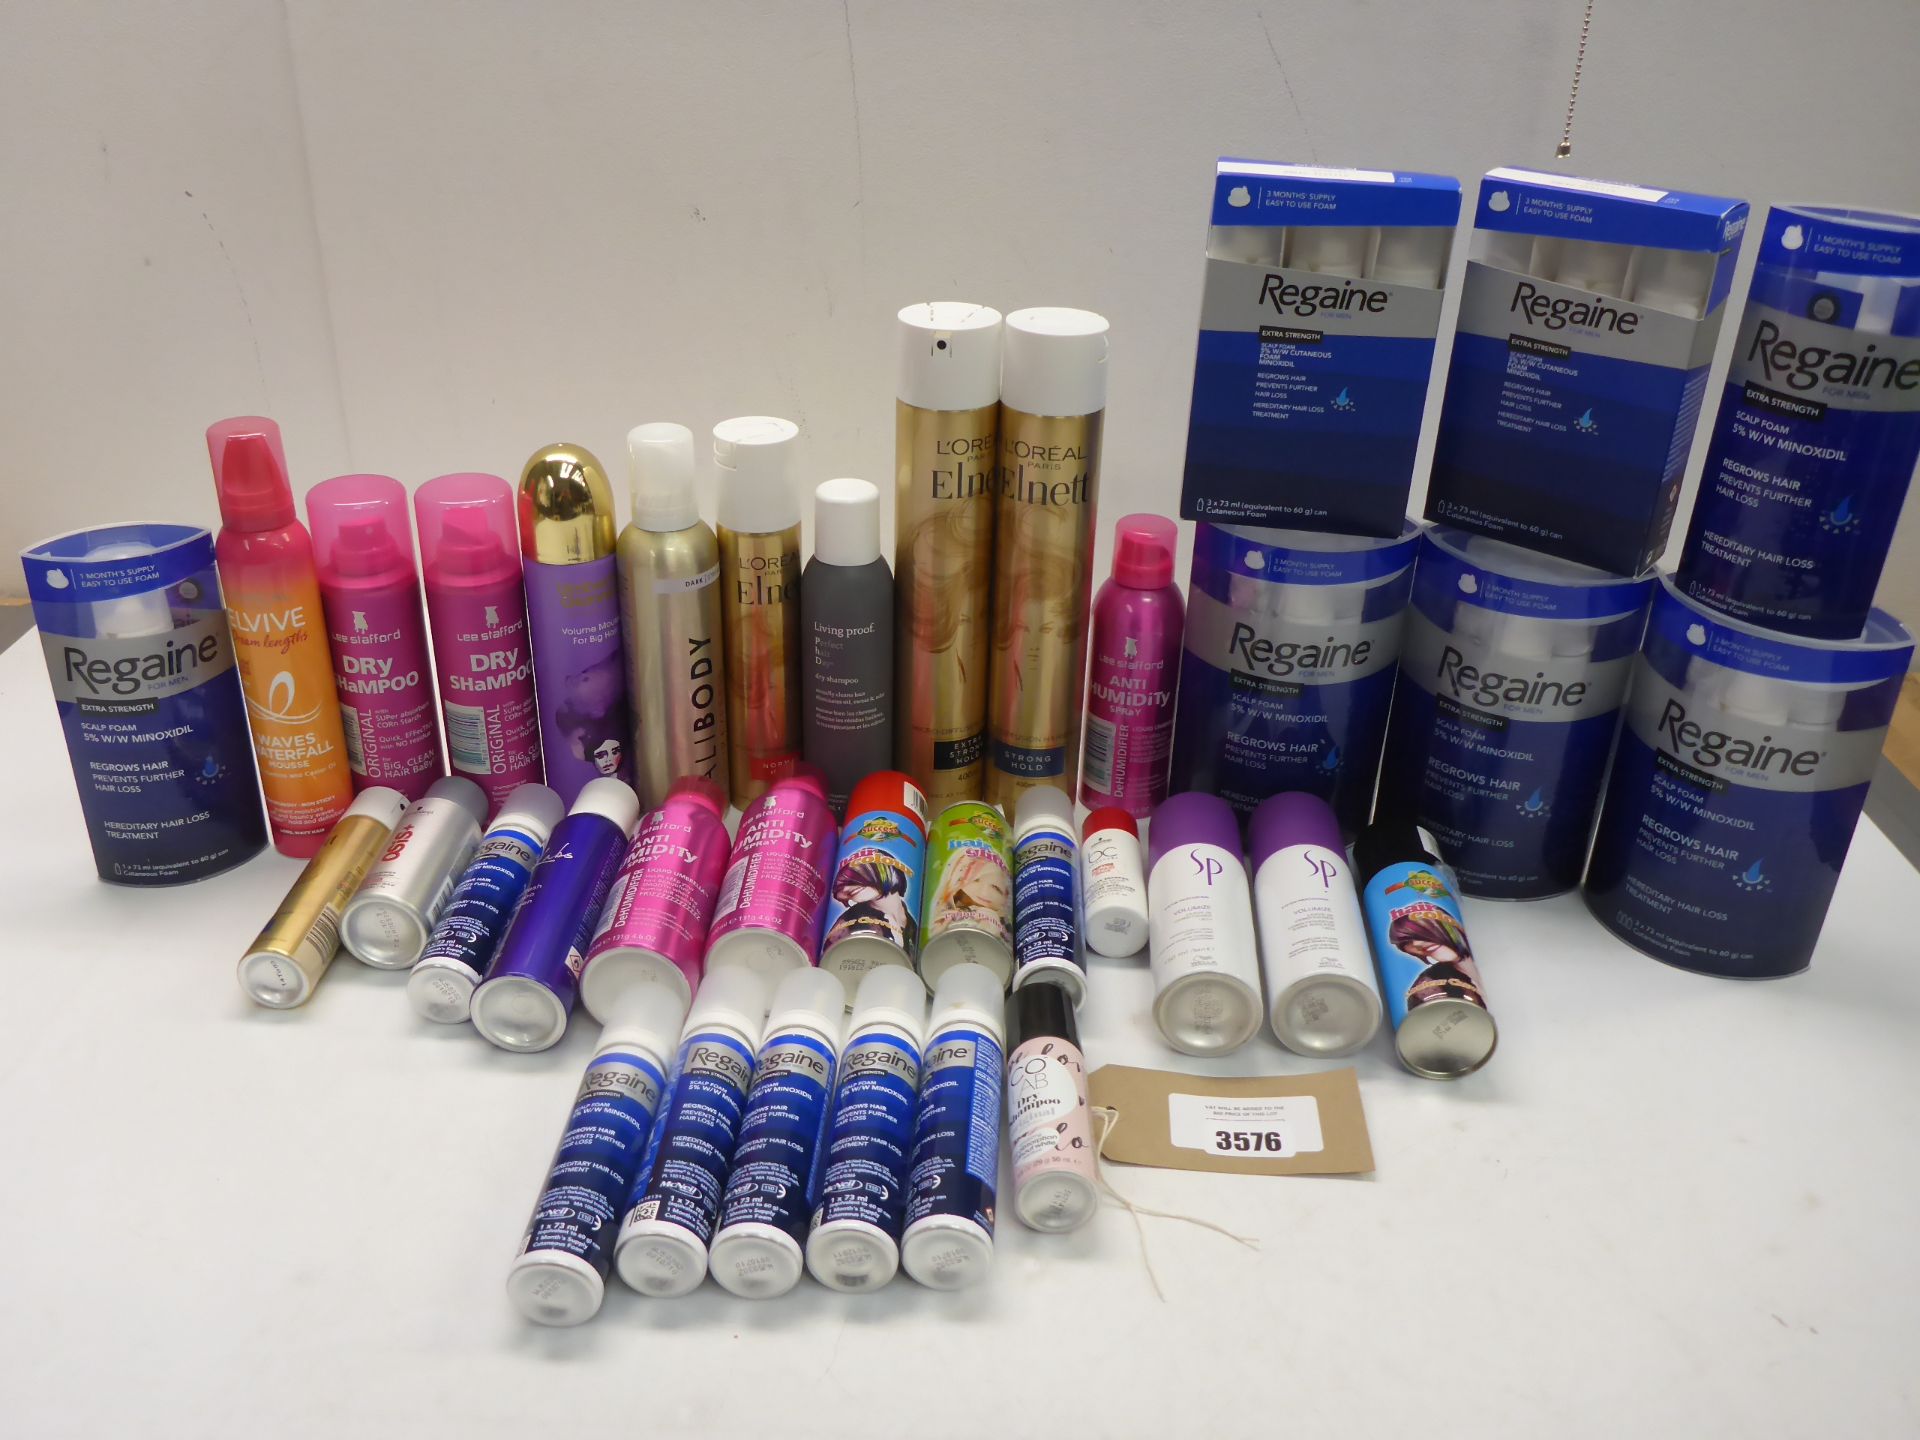 Selection of hair products including dry shampoo, hair spray, Regaine, mousse etc